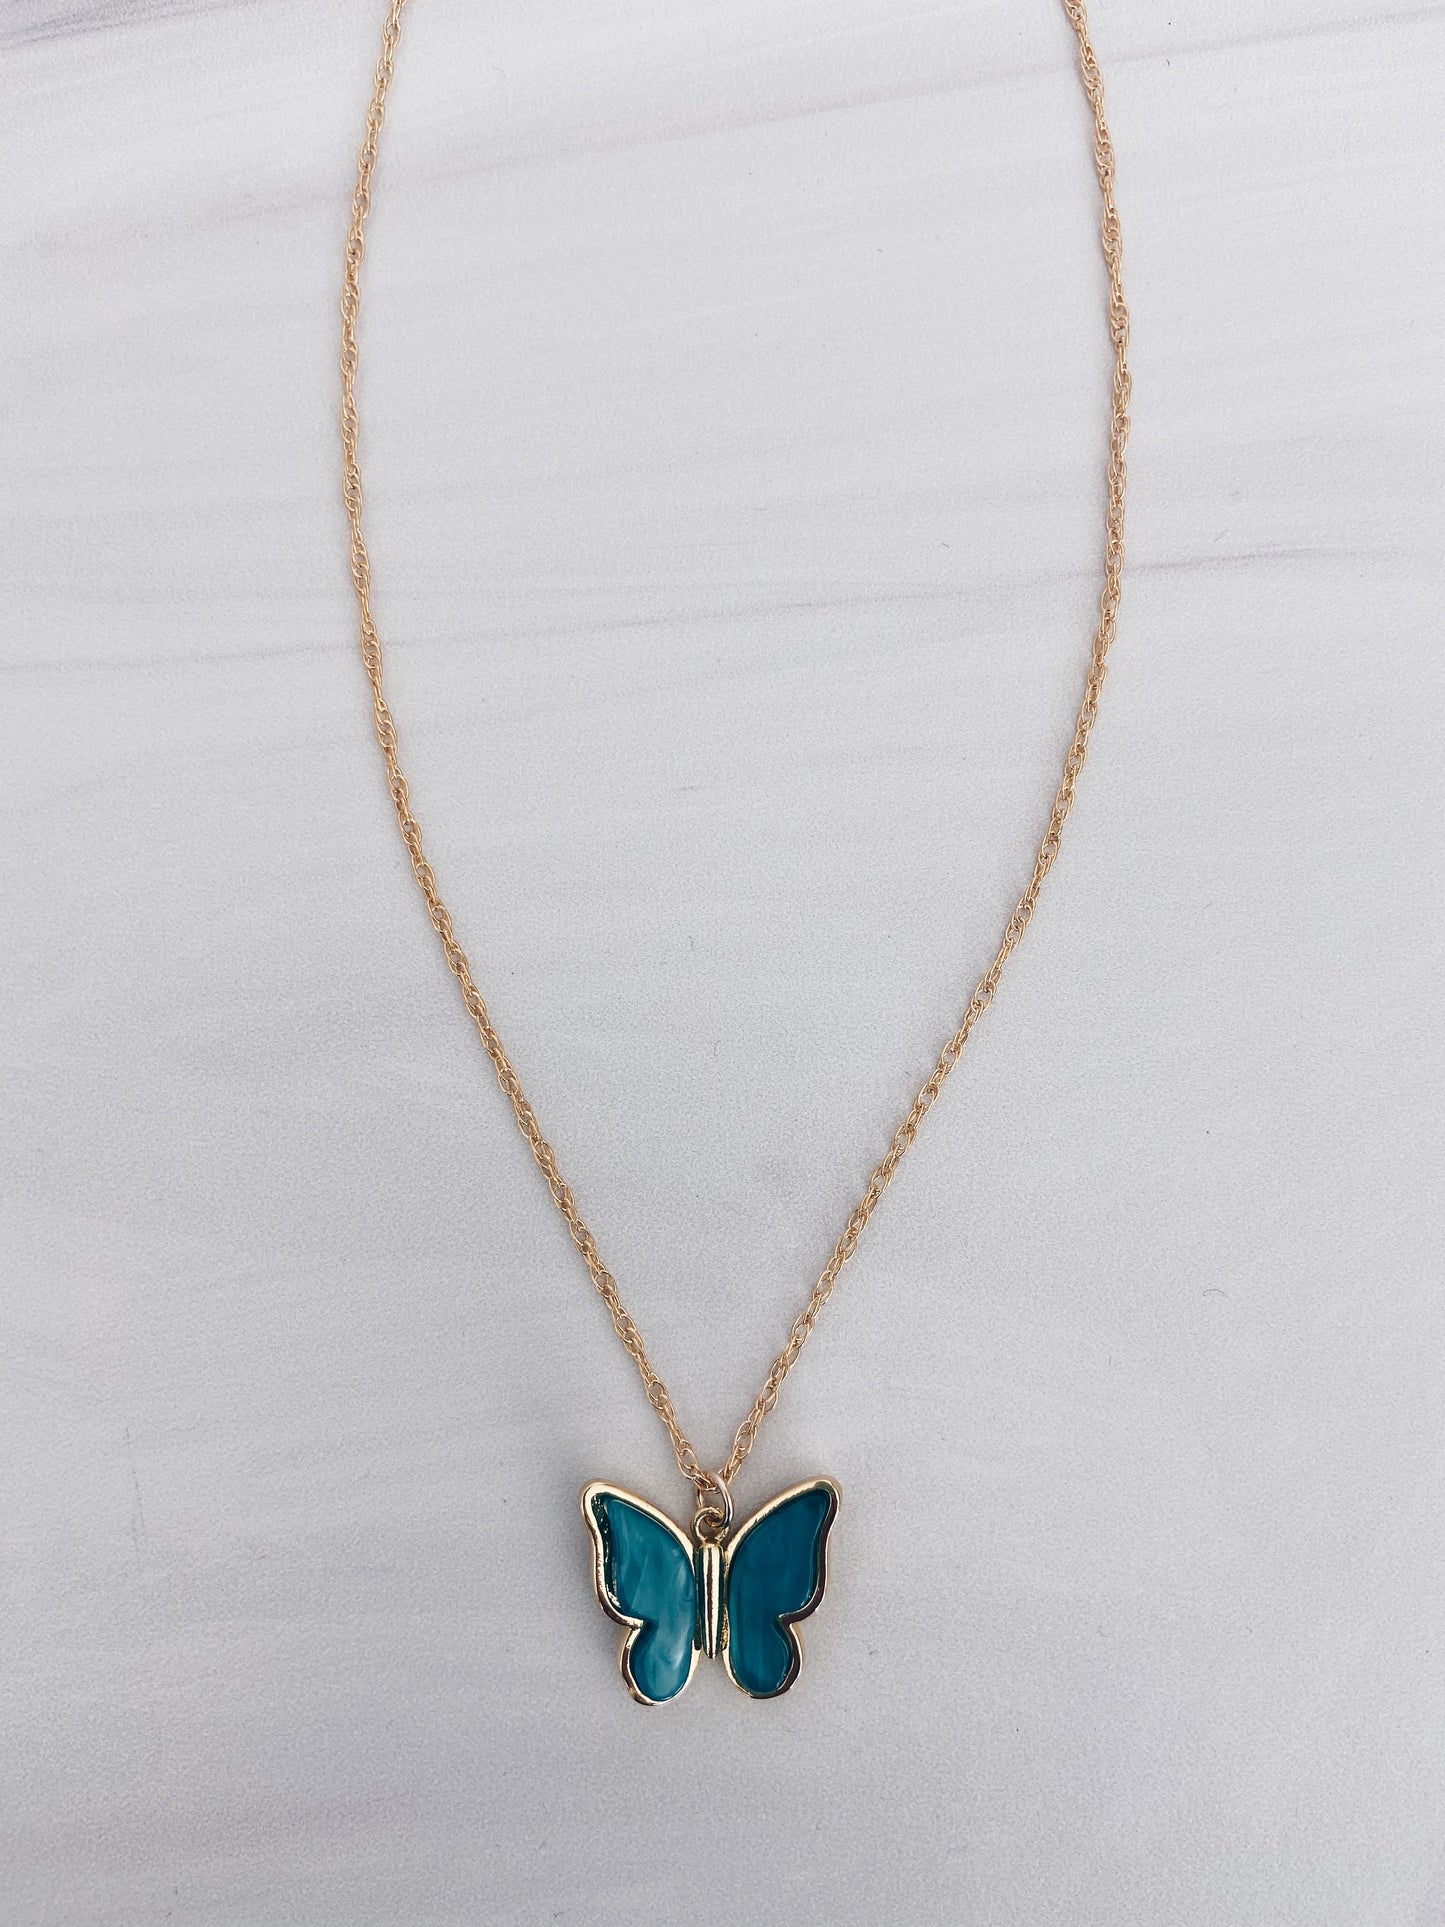 Pearlized Enamel Butterfly Necklace + More Colors